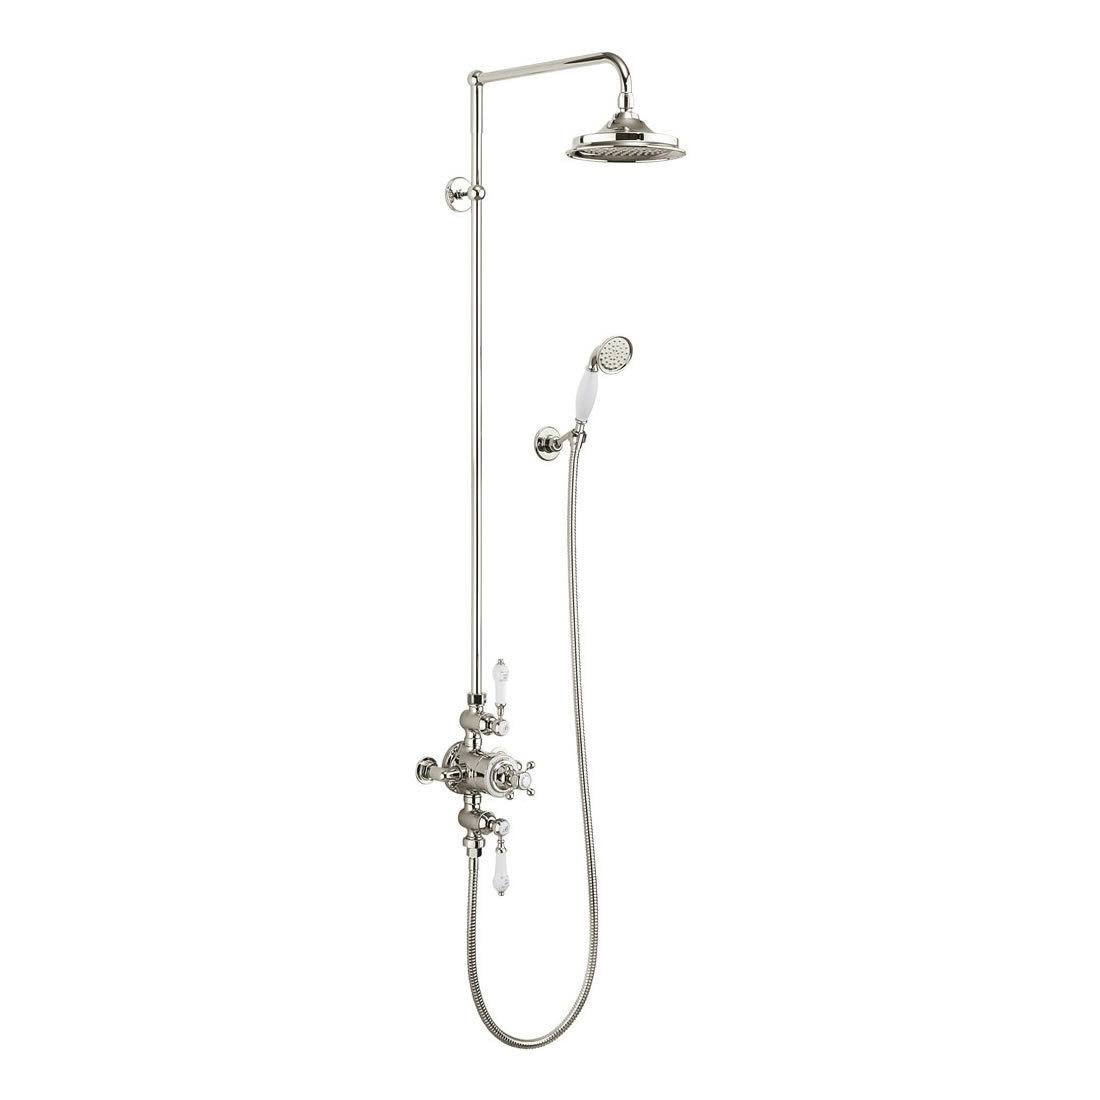 Avon Medici Thermostatic Exposed Shower Valve Two Outlet,Extended Rigid Riser, Swivel Shower Arm, Handset & Holder with Hose with 9 inch rose  - NICKEL